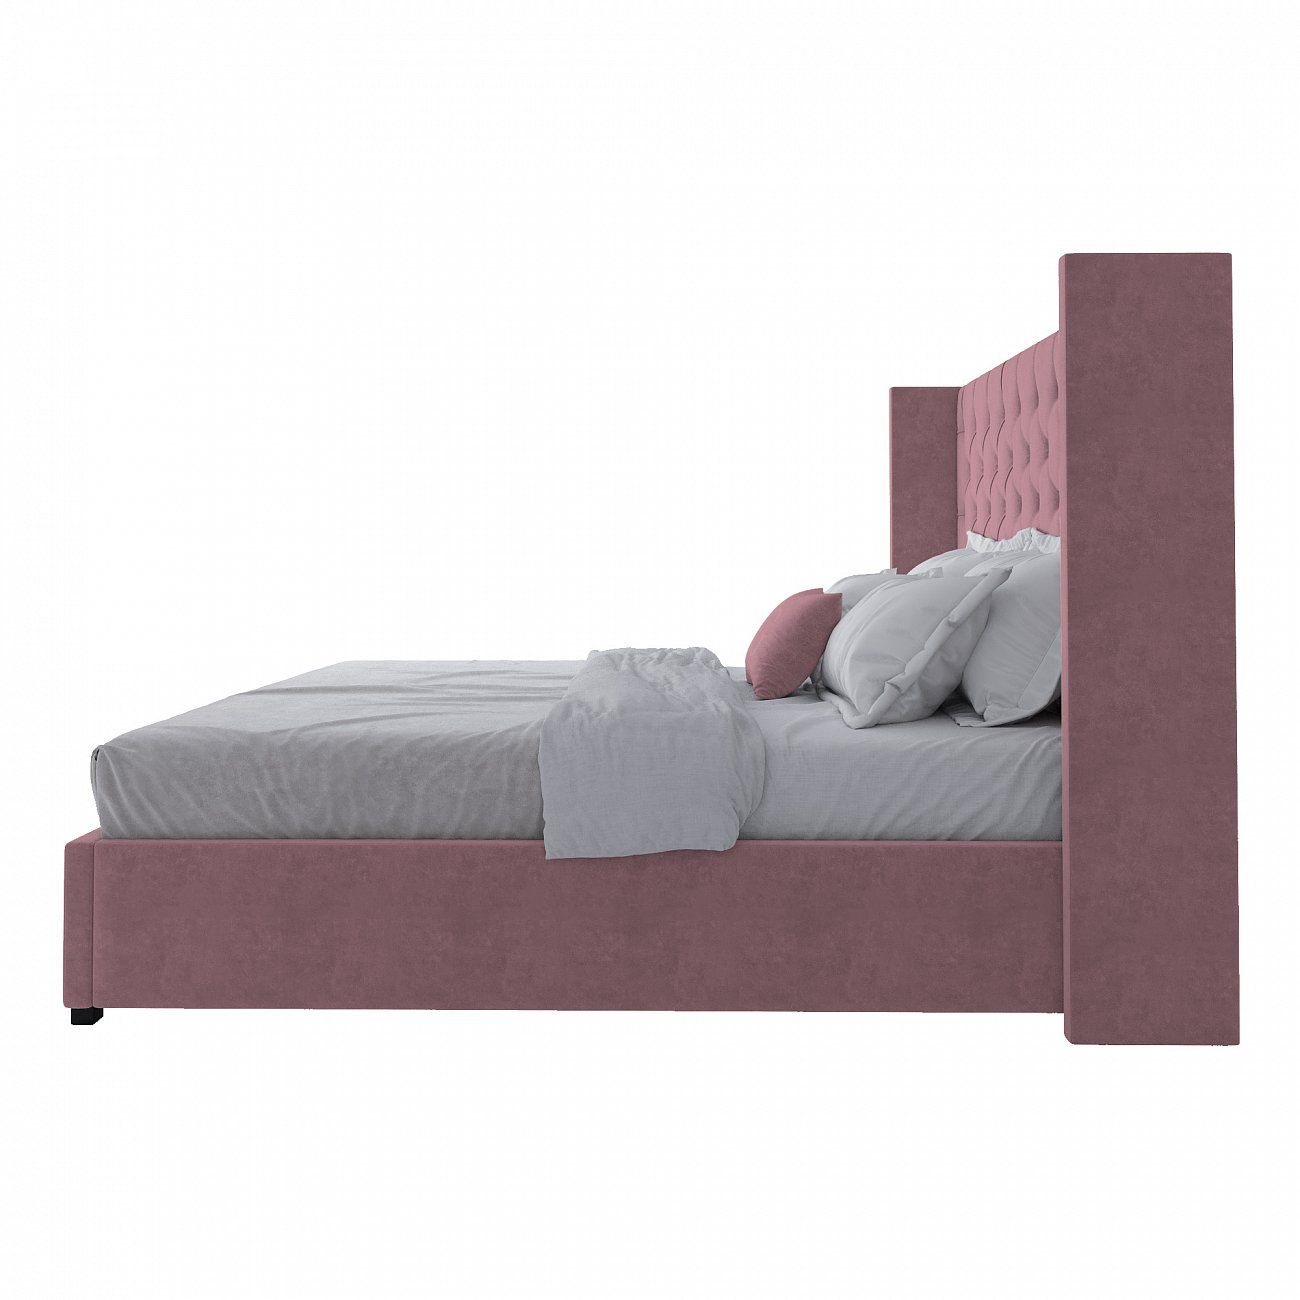 Double bed 200x200 cm dusty rose with carriage tie without studs Wing-2